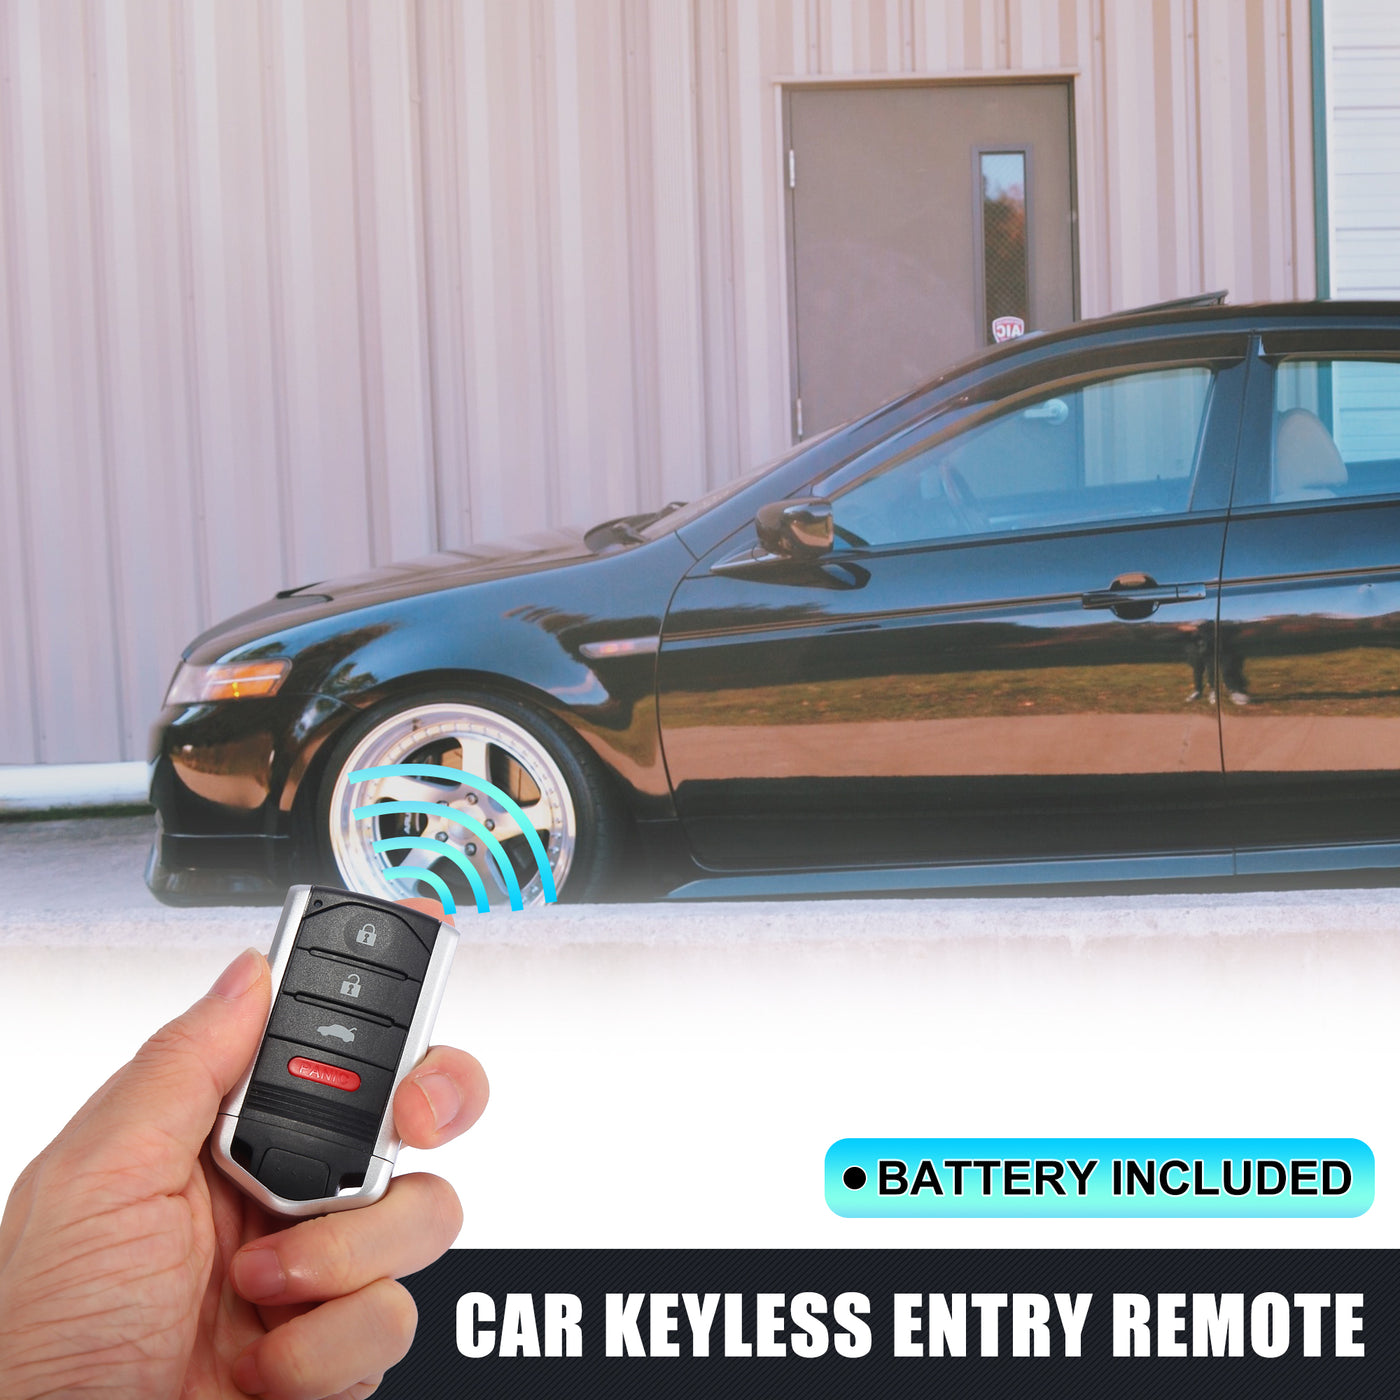 X AUTOHAUX 314MHz M3N5WY8145 Replacement Keyless Entry Remote Car Key Fob for Acura TL 2009 2010 2011 2012 2013 2014 267F-5WY8145  3+1 Buttons